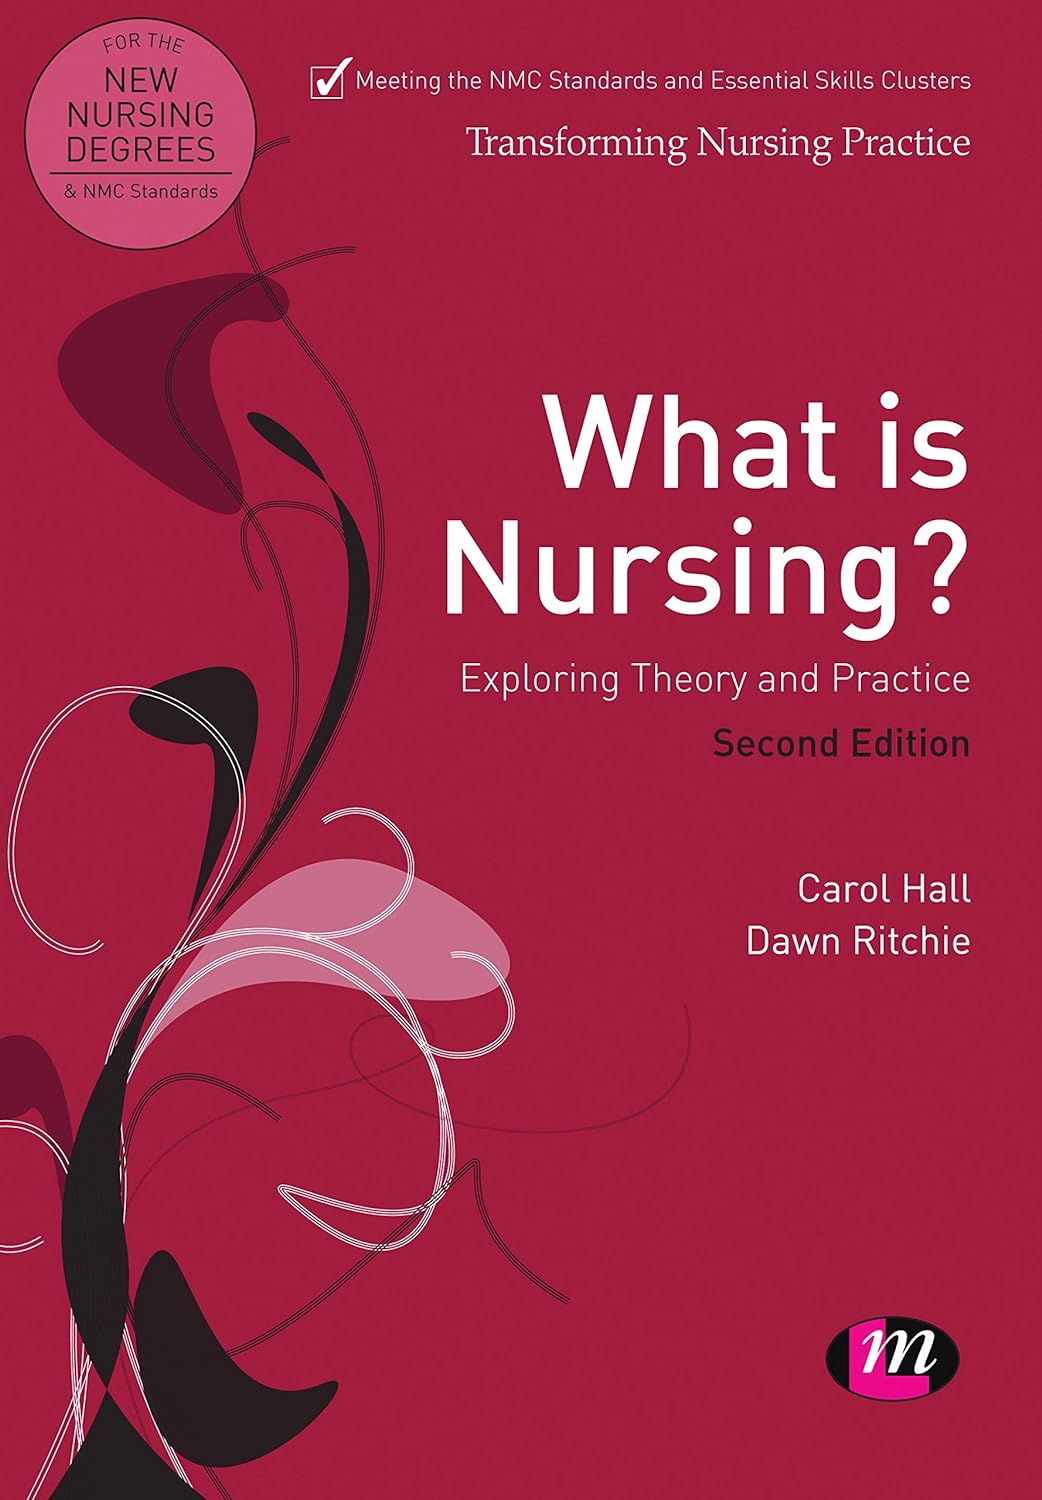 What is Nursing? Exploring Theory and Practice: Exploring Theory and Practice (Transforming Nursing Practice Series), 3rd Edition by Carol Hall